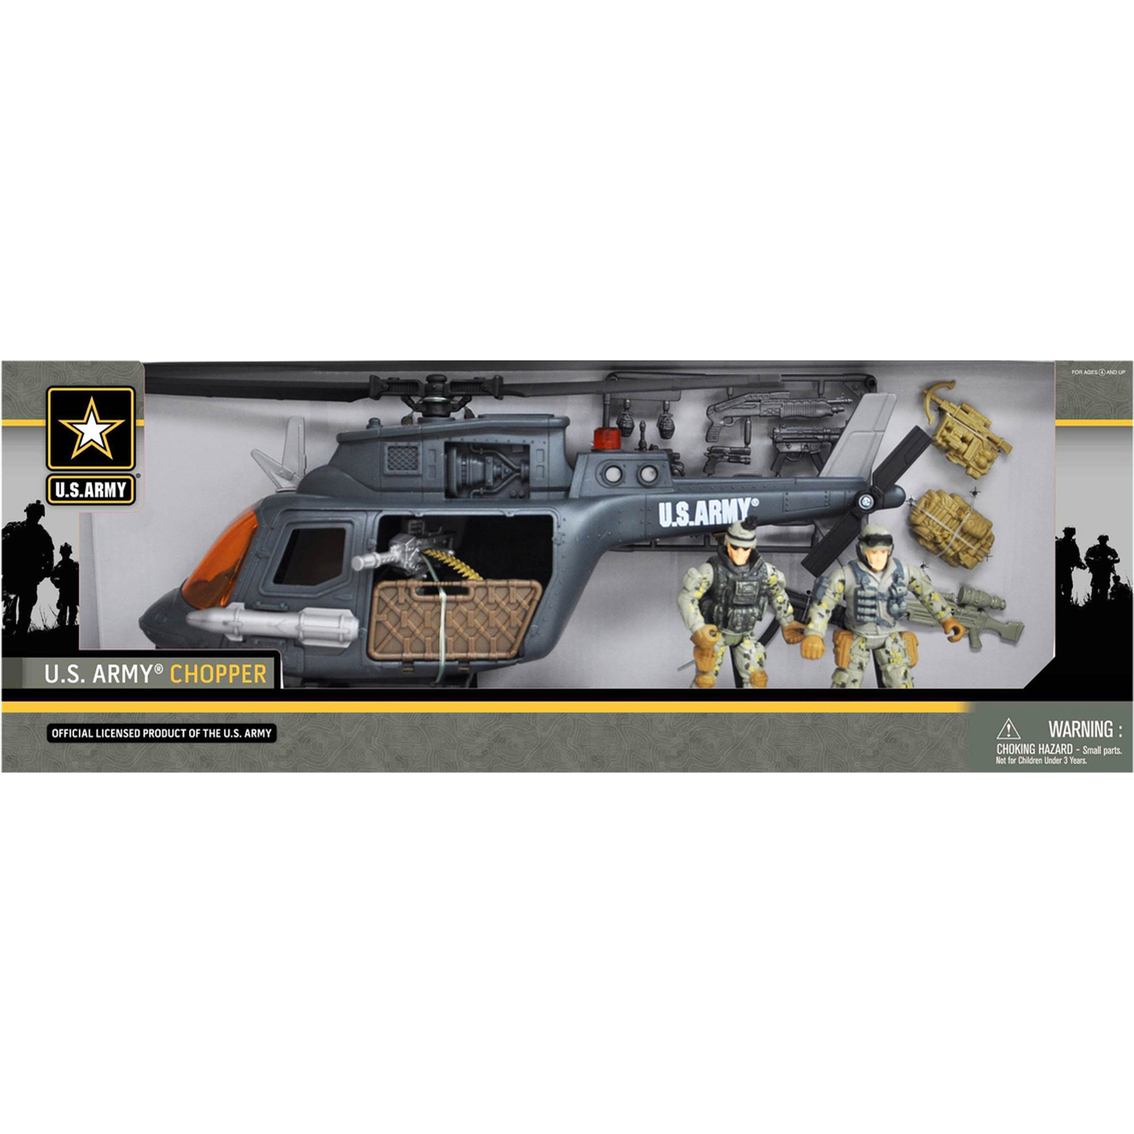 Excite U.S. Army Chopper with Soldiers Playset